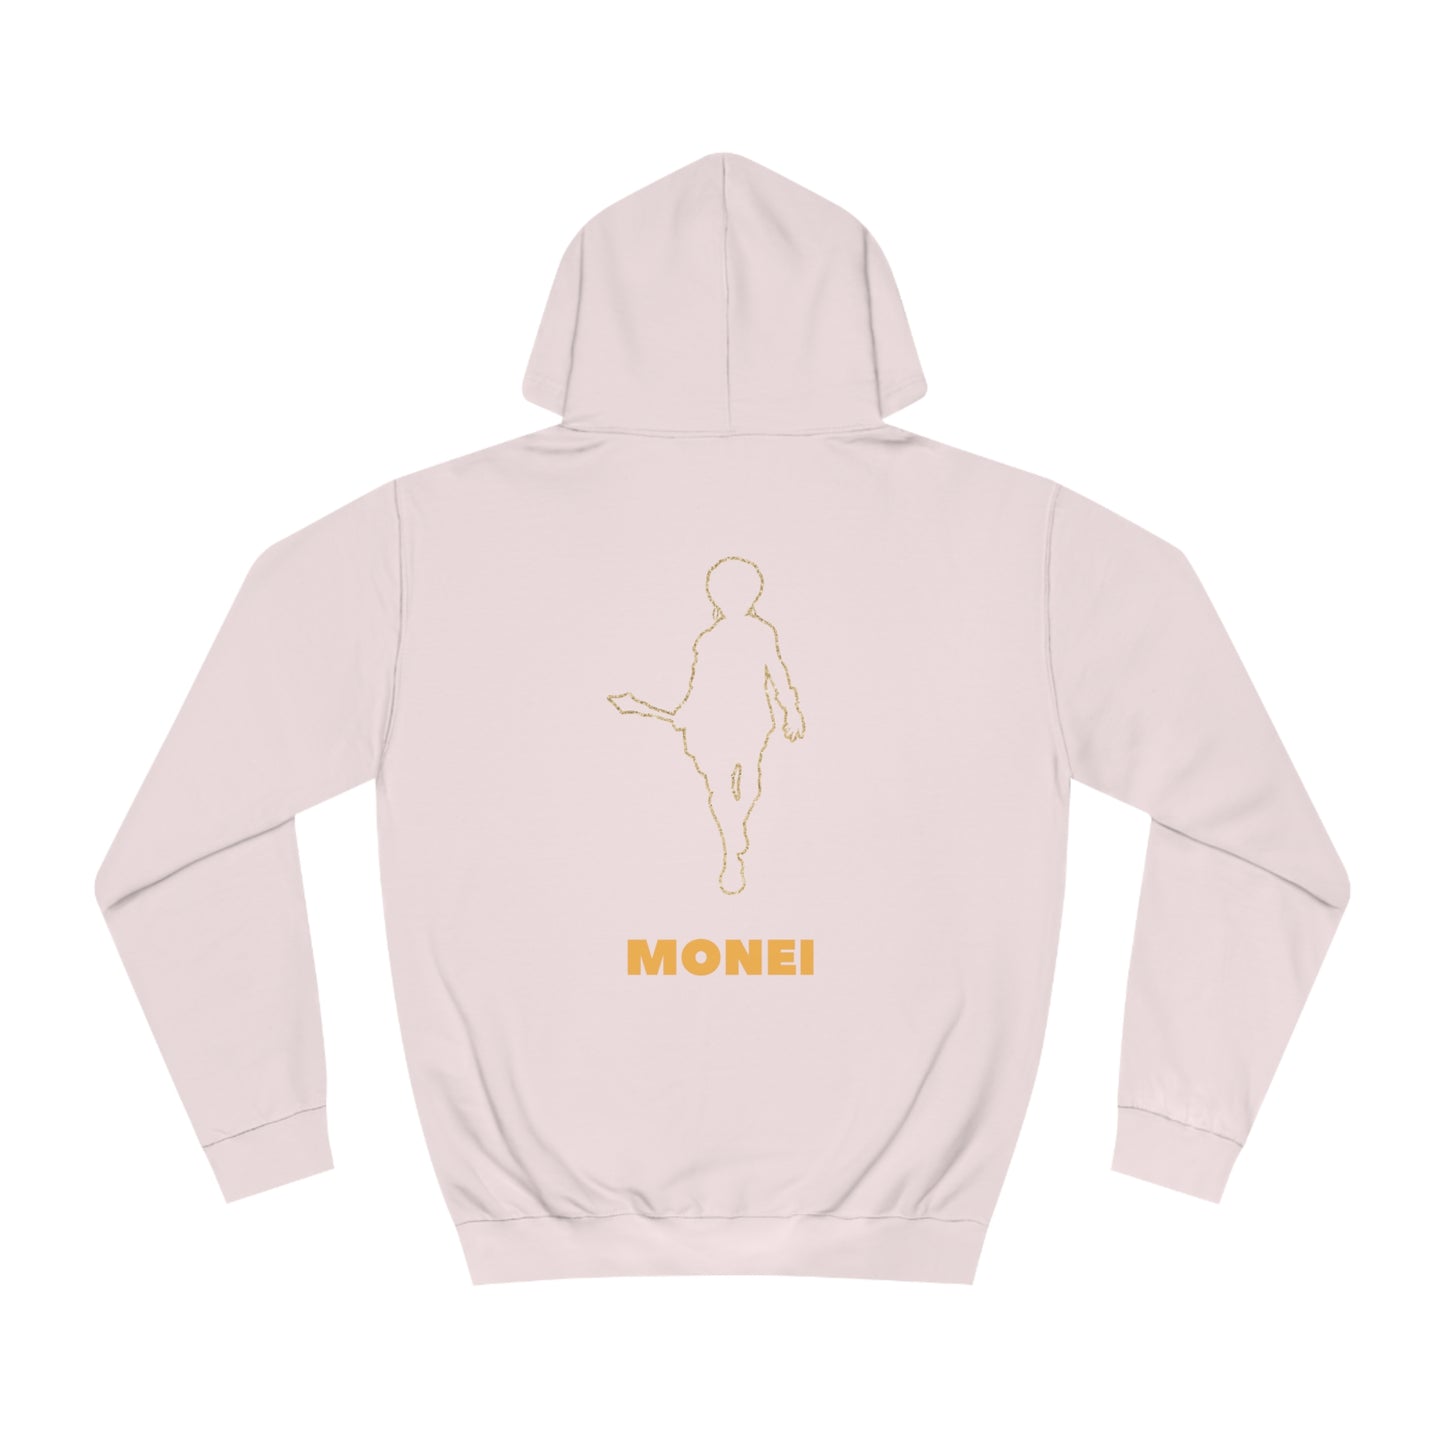 New Monei College Hoodie Includes Back Designs